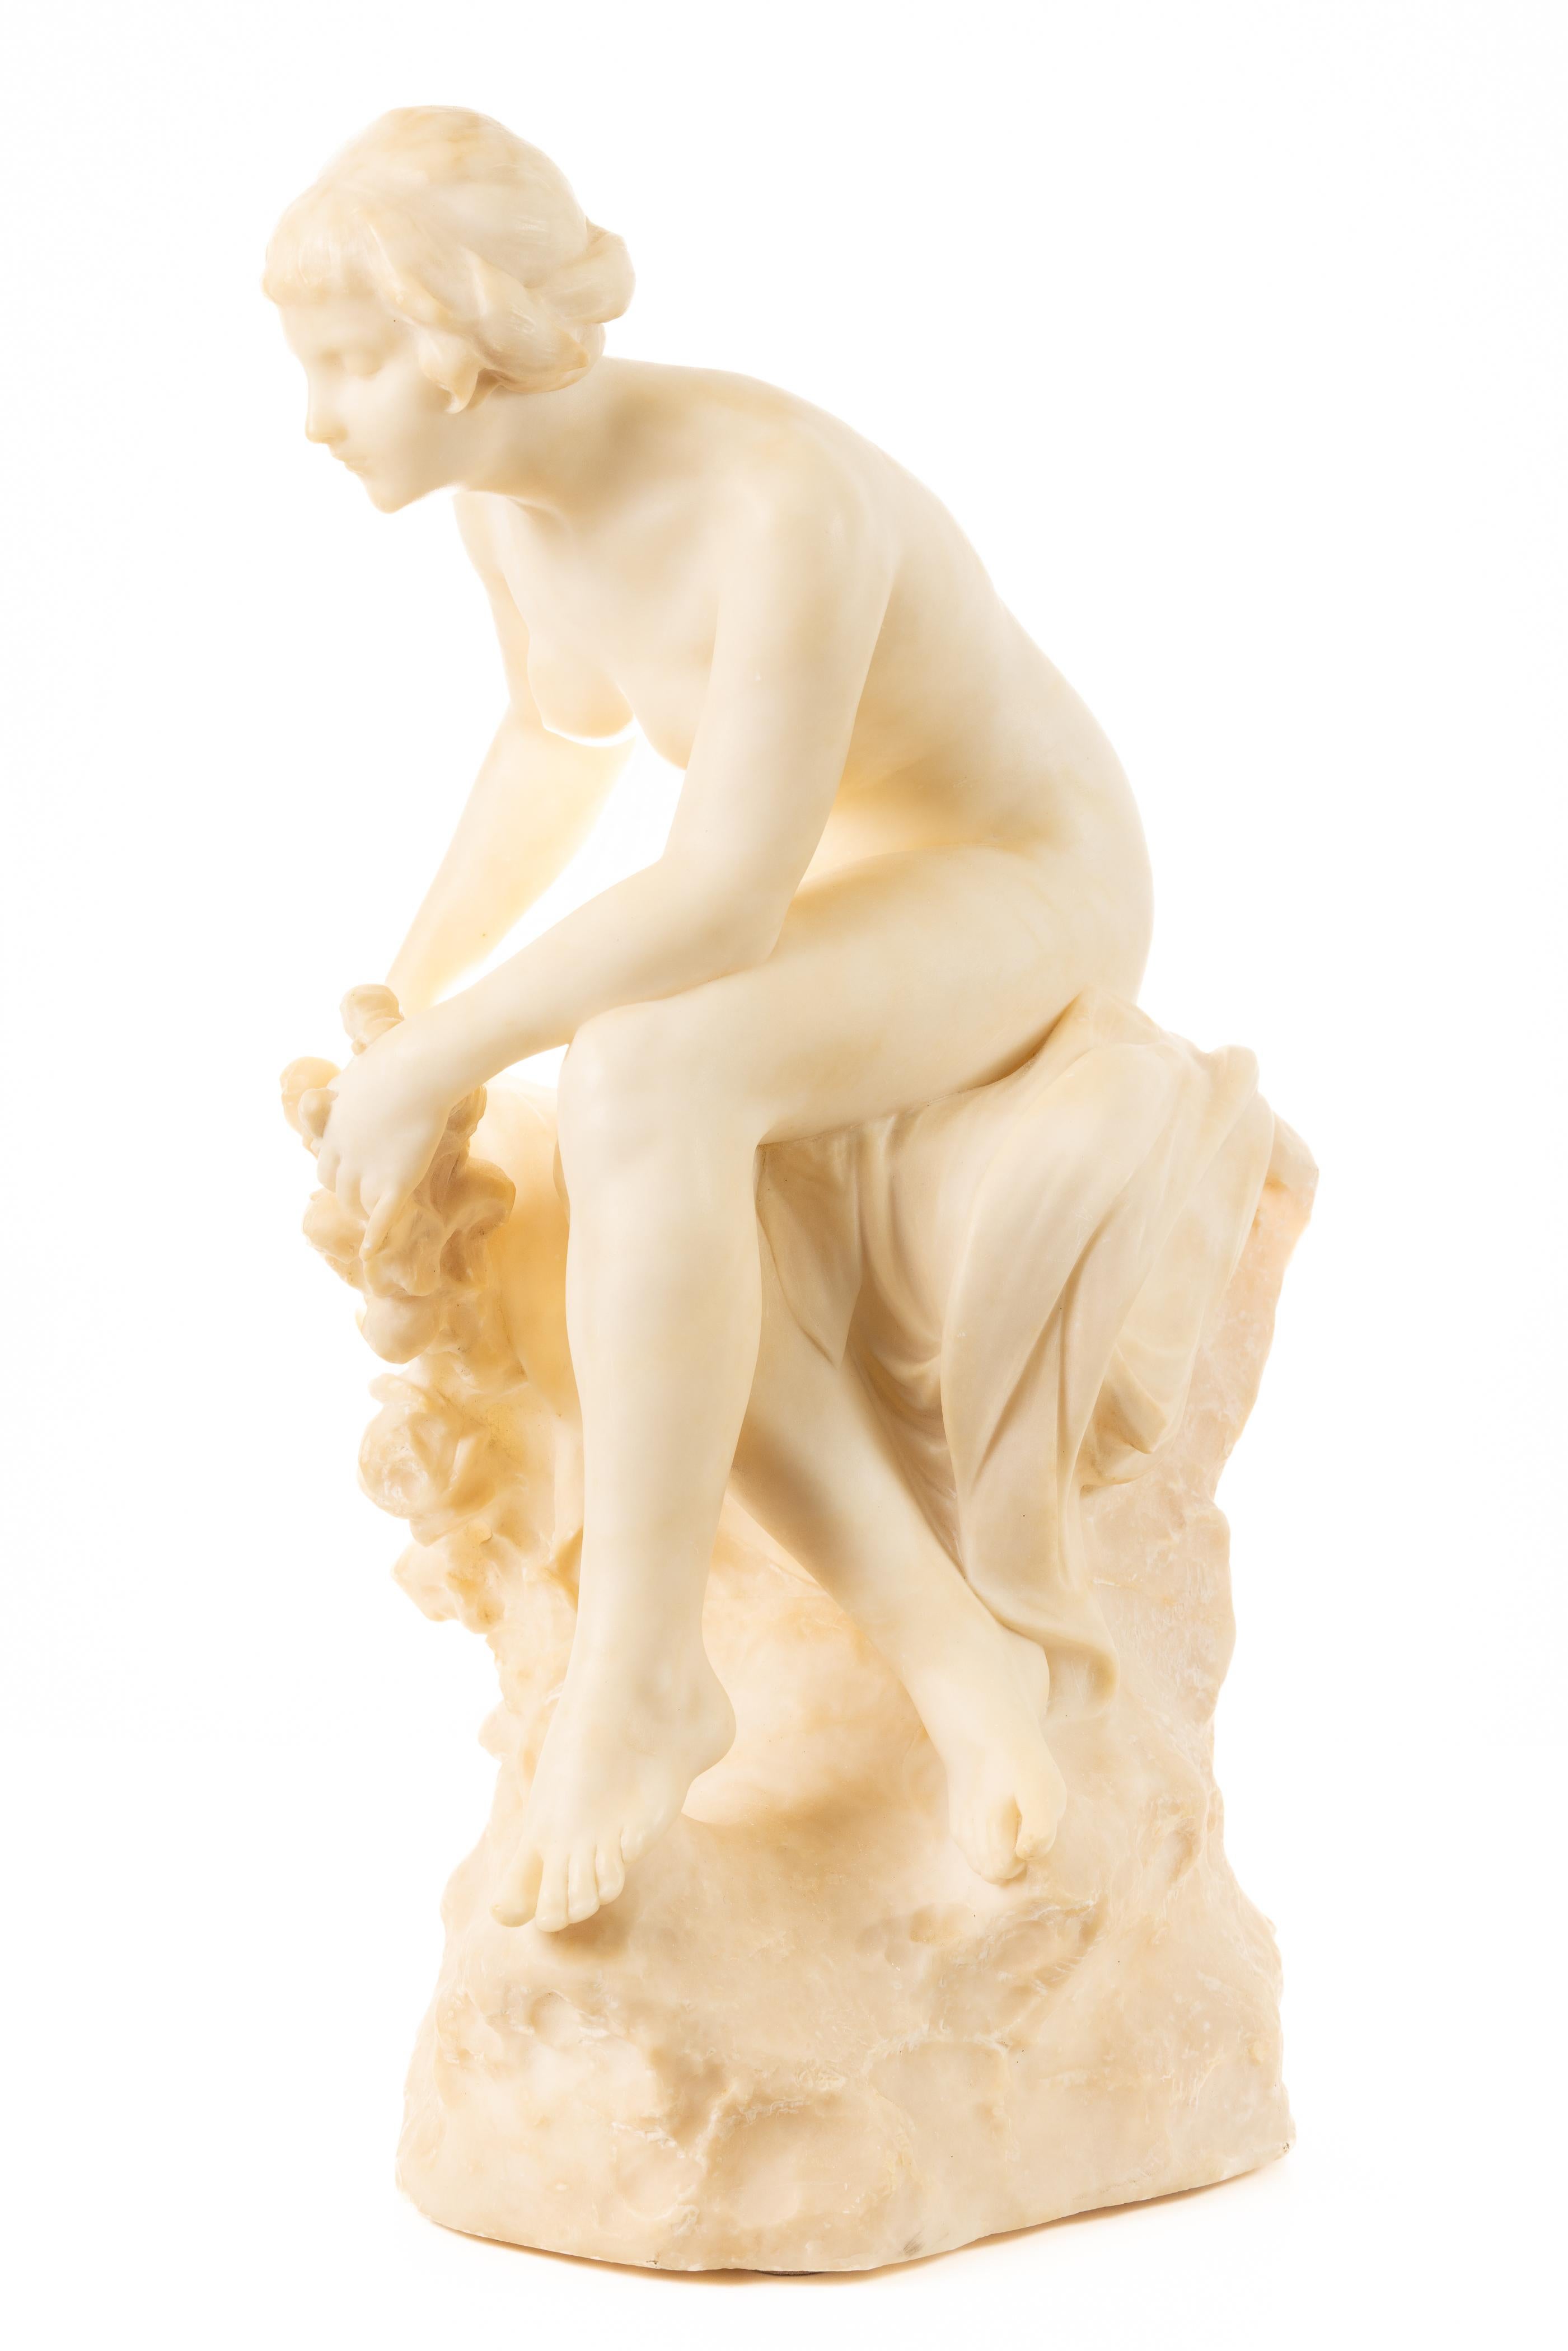 Nude Young Woman - Sculpture by Pietro Ceccarelli